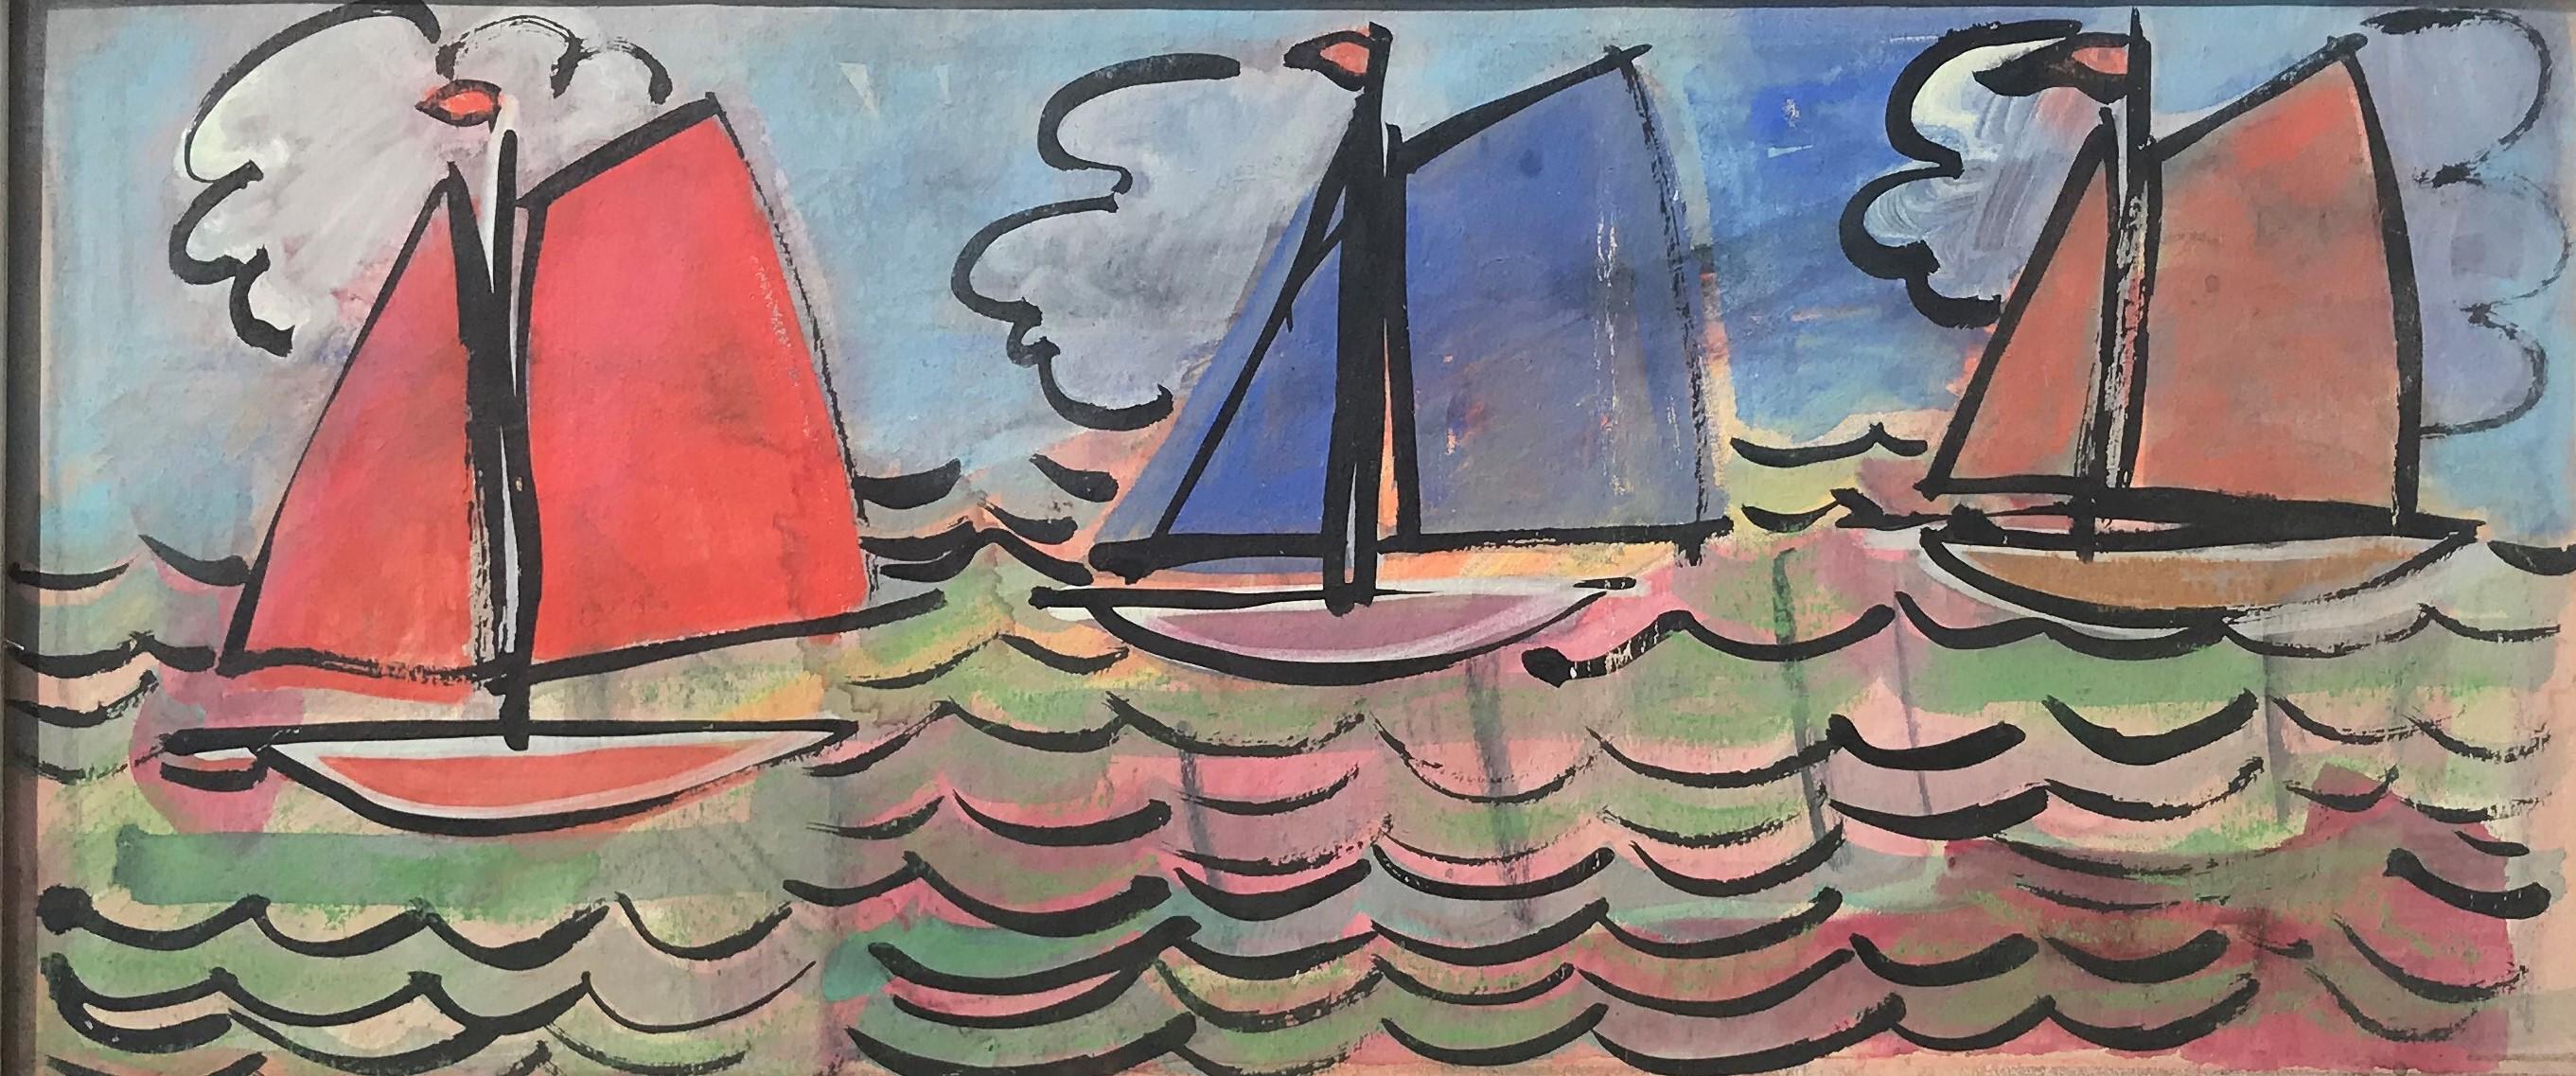 Unknown Landscape Painting - Sailboats at Sea, 20th Century French School, colourful original oil on canvas